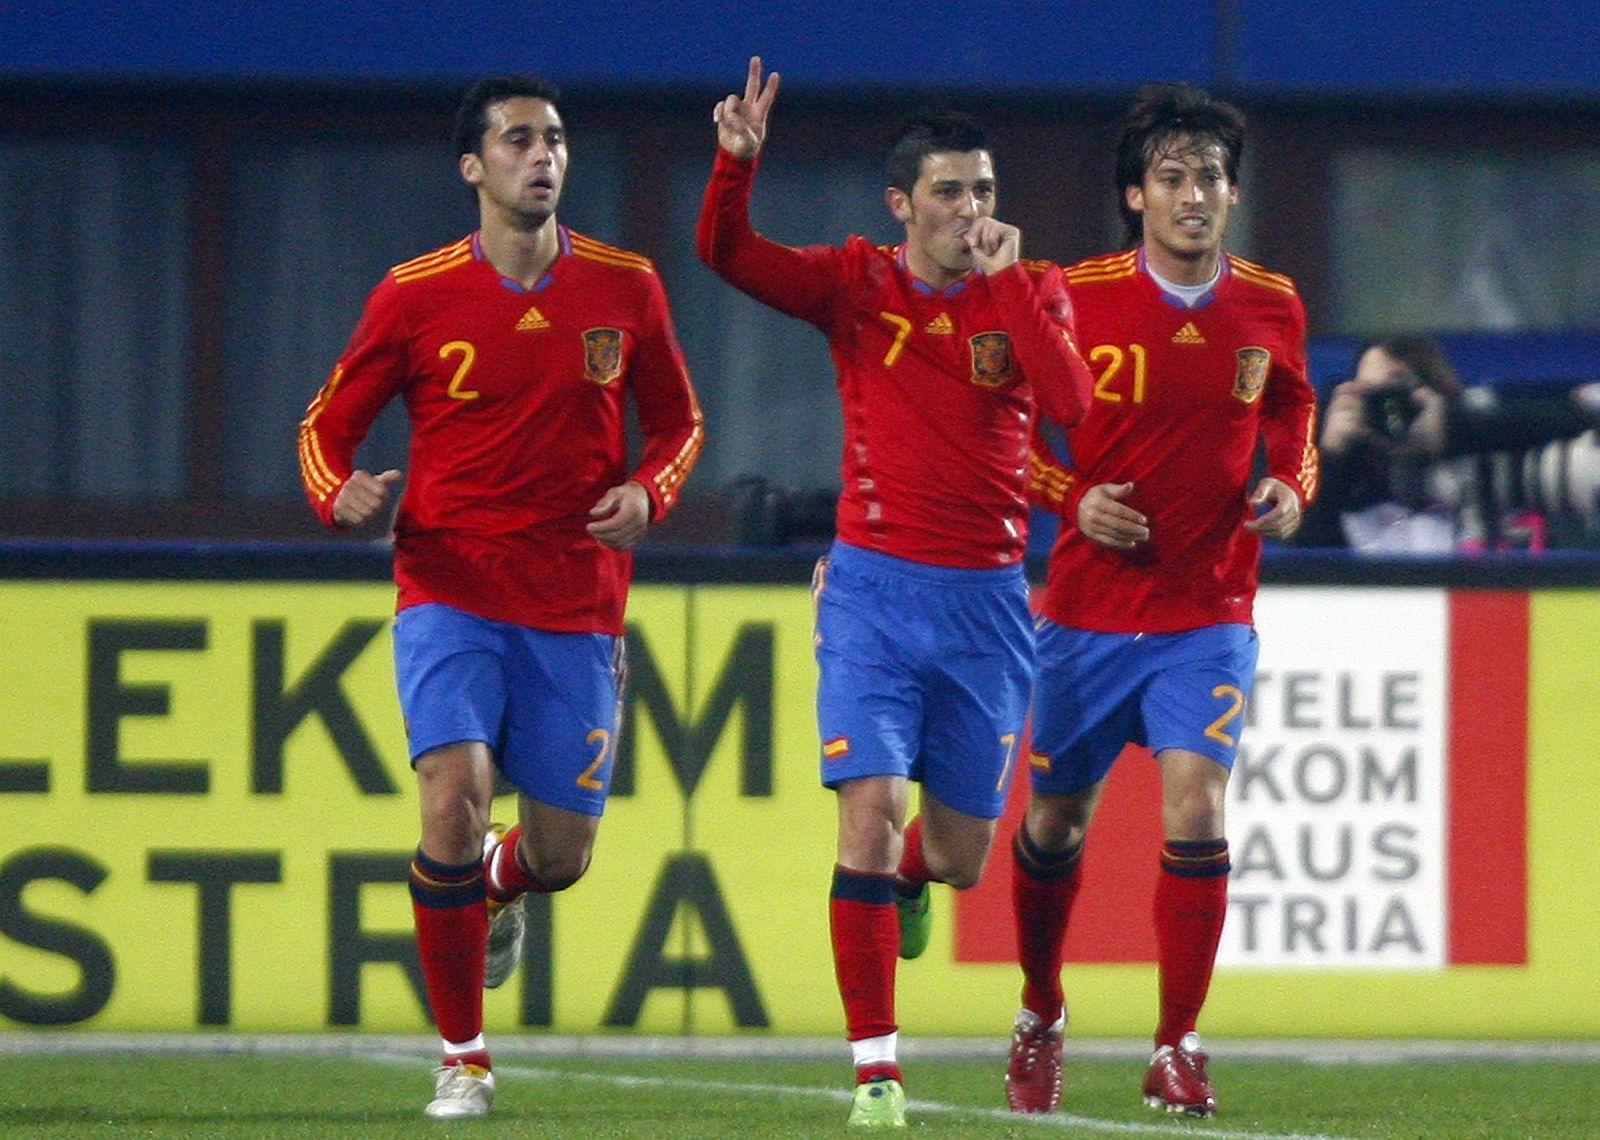 Spain's Villa celebrates with his team mates Arbeloa and Silva after scoring Spain's second goal during their international friendly soccer match in Vienna